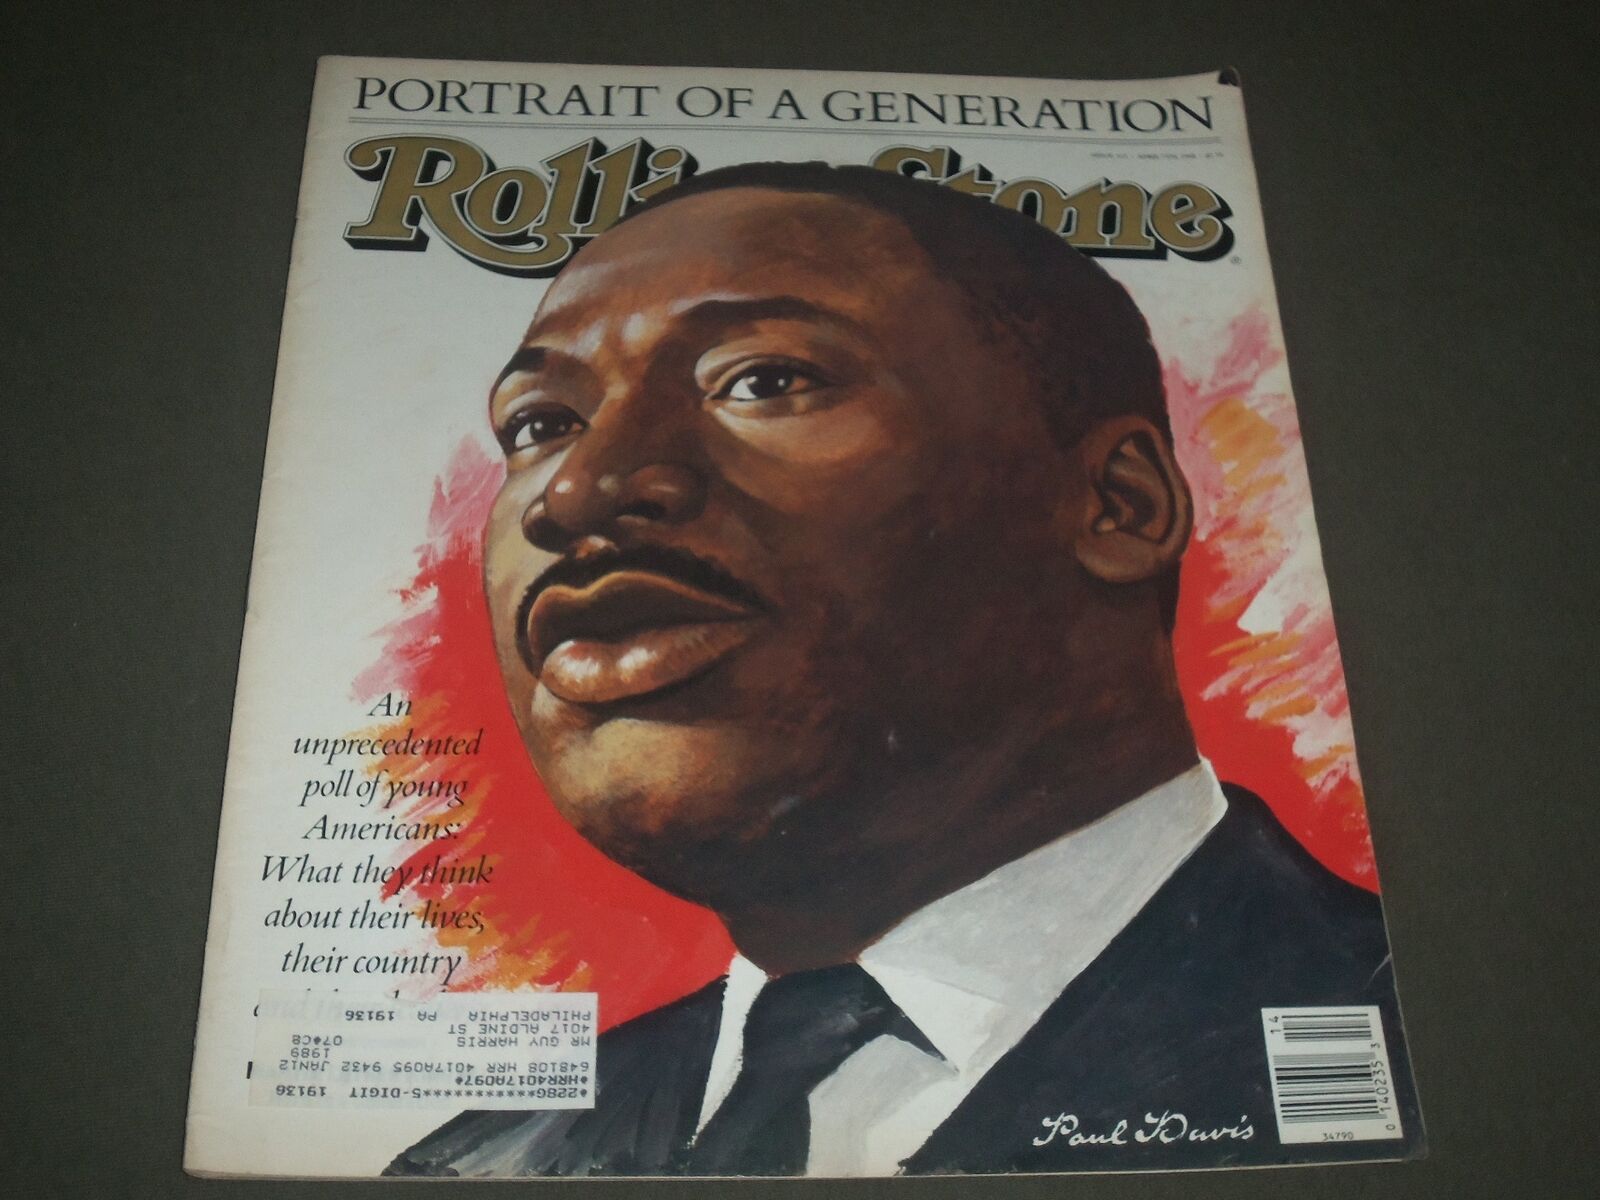 1988 APRIL 7 ROLLING STONE MAGAZINE - MARTIN LUTHER KING COVER - PB 1246